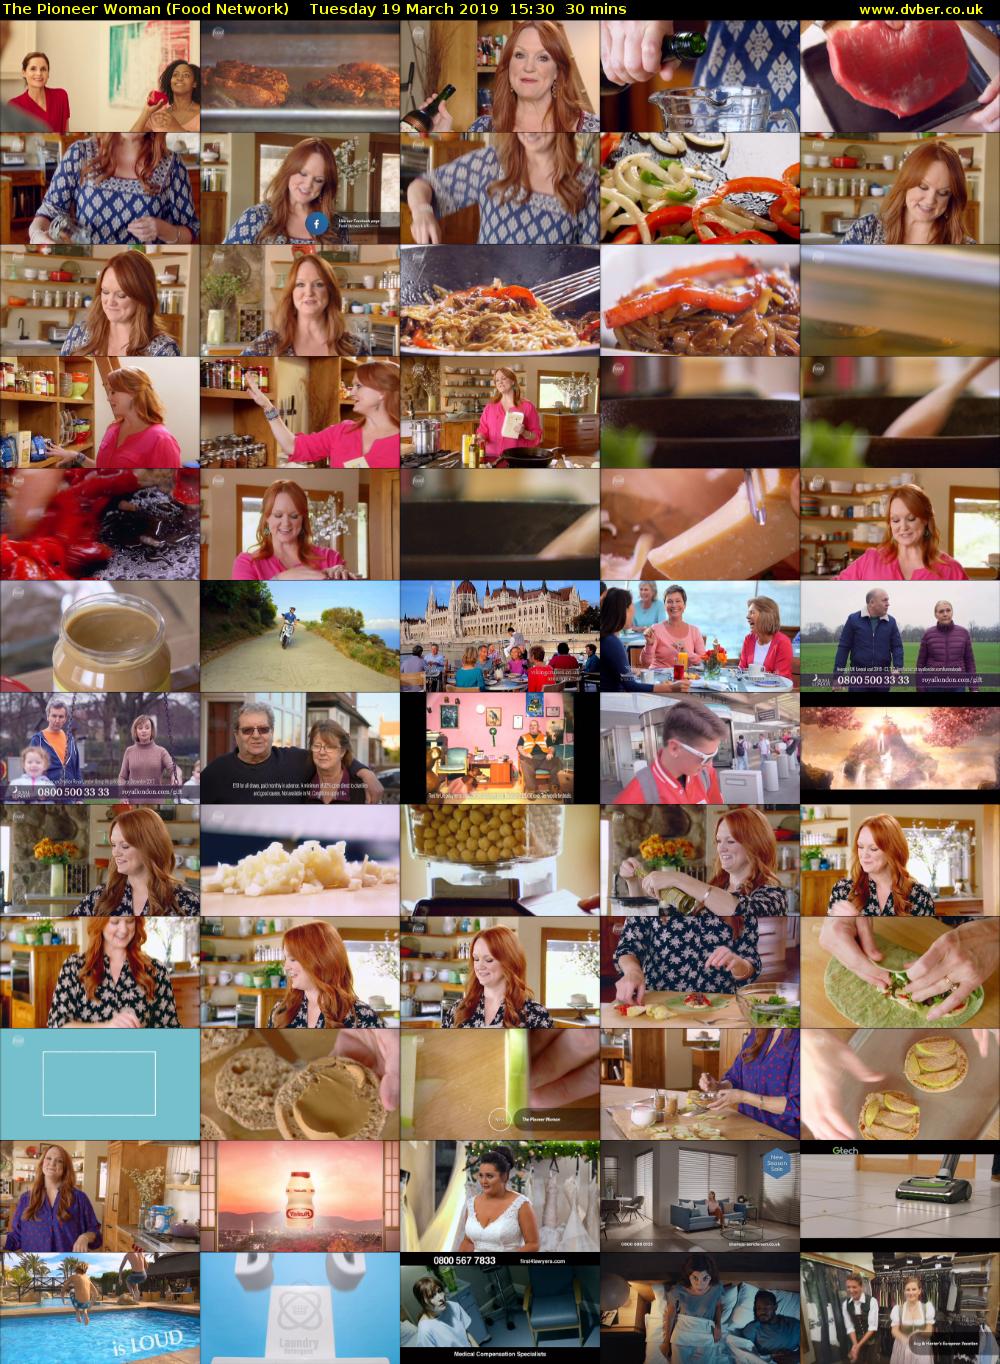 The Pioneer Woman (Food Network) Tuesday 19 March 2019 15:30 - 16:00